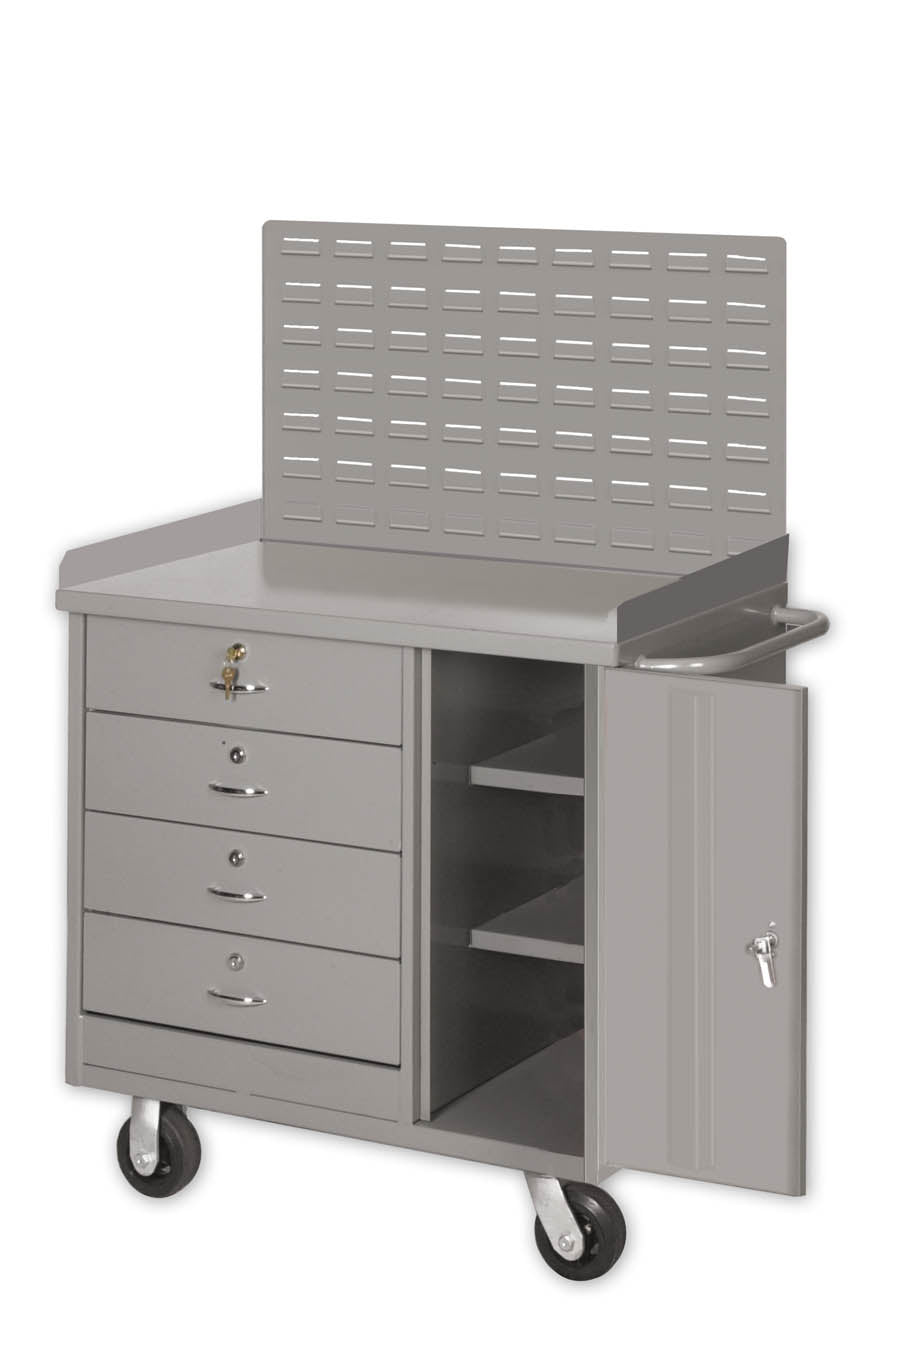 Pucel Door & Drawer Work Bench w/ Outer Louvered